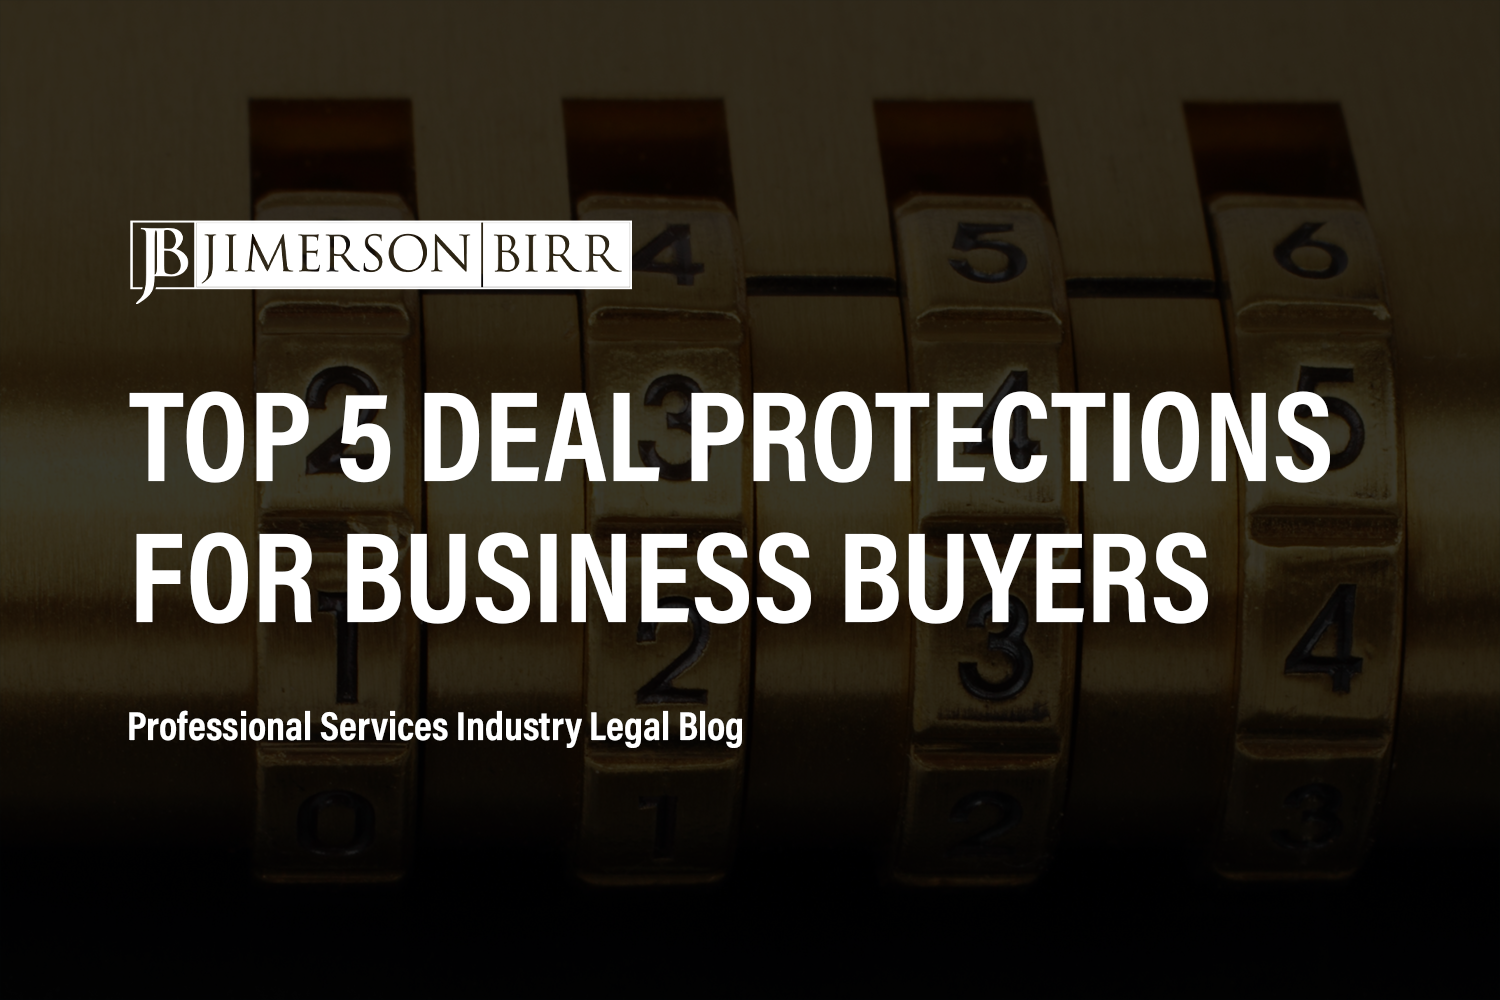 Top 5 Deal Protections for Business Buyers